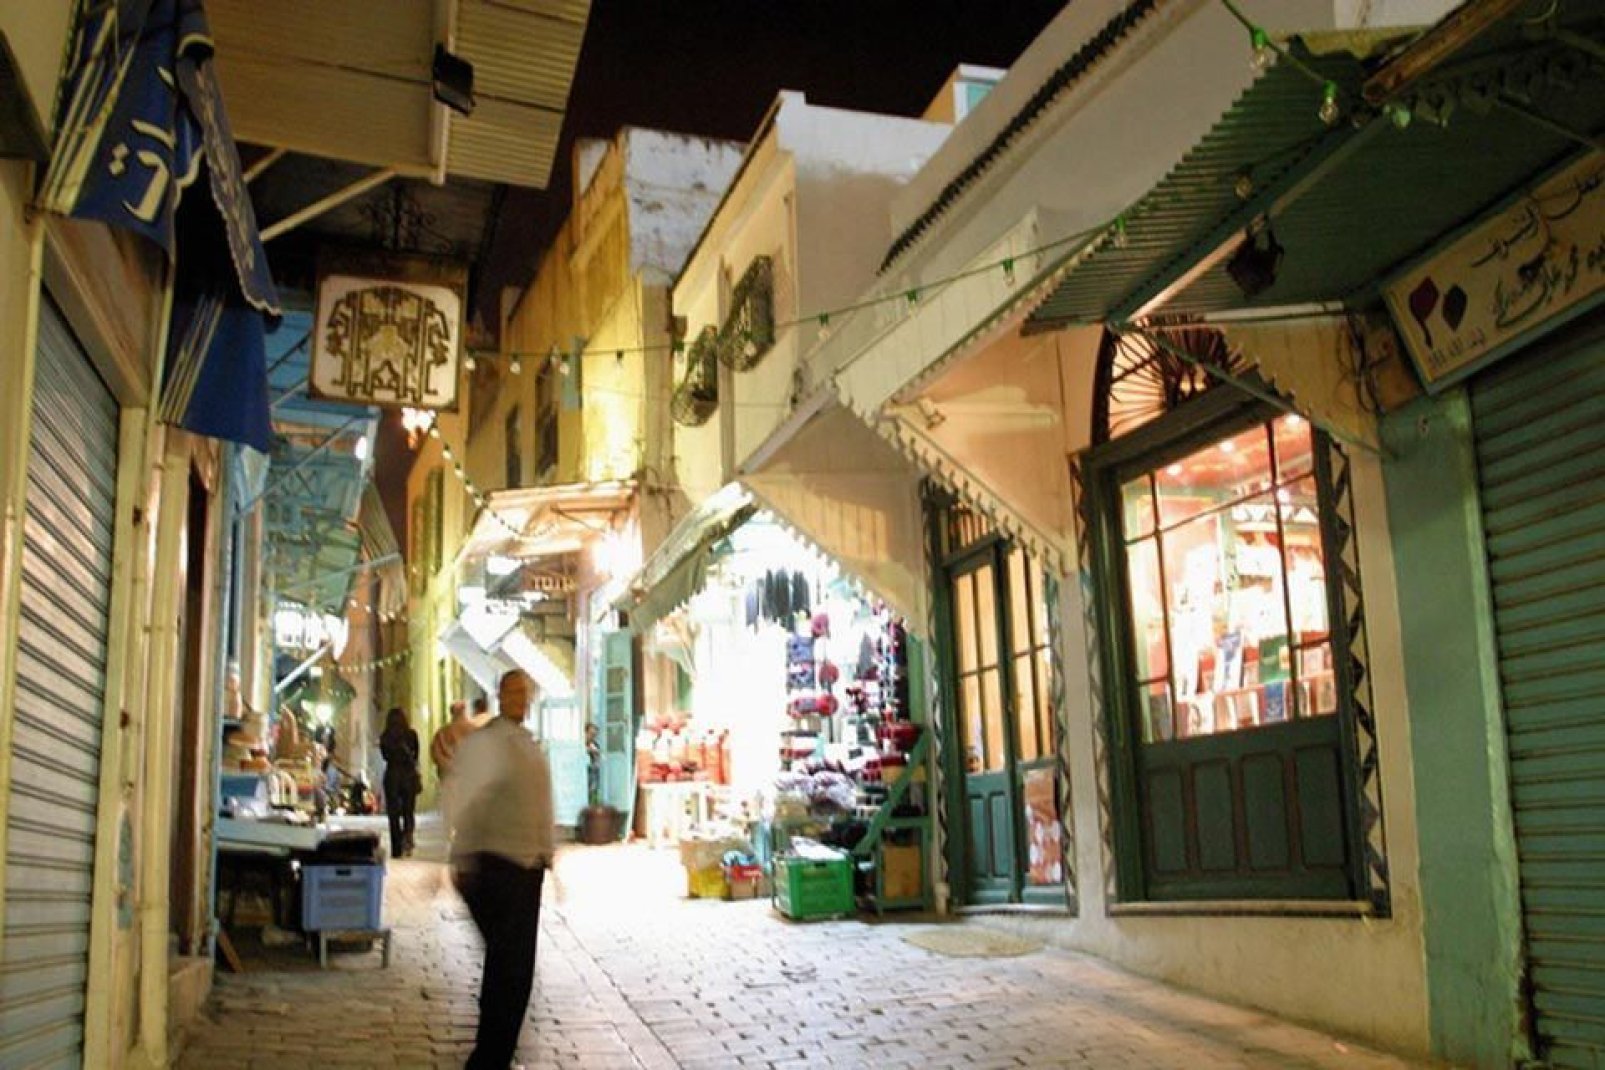 The Tunis Medina has been listed as a UNESCO World Heritage Site since 1979.